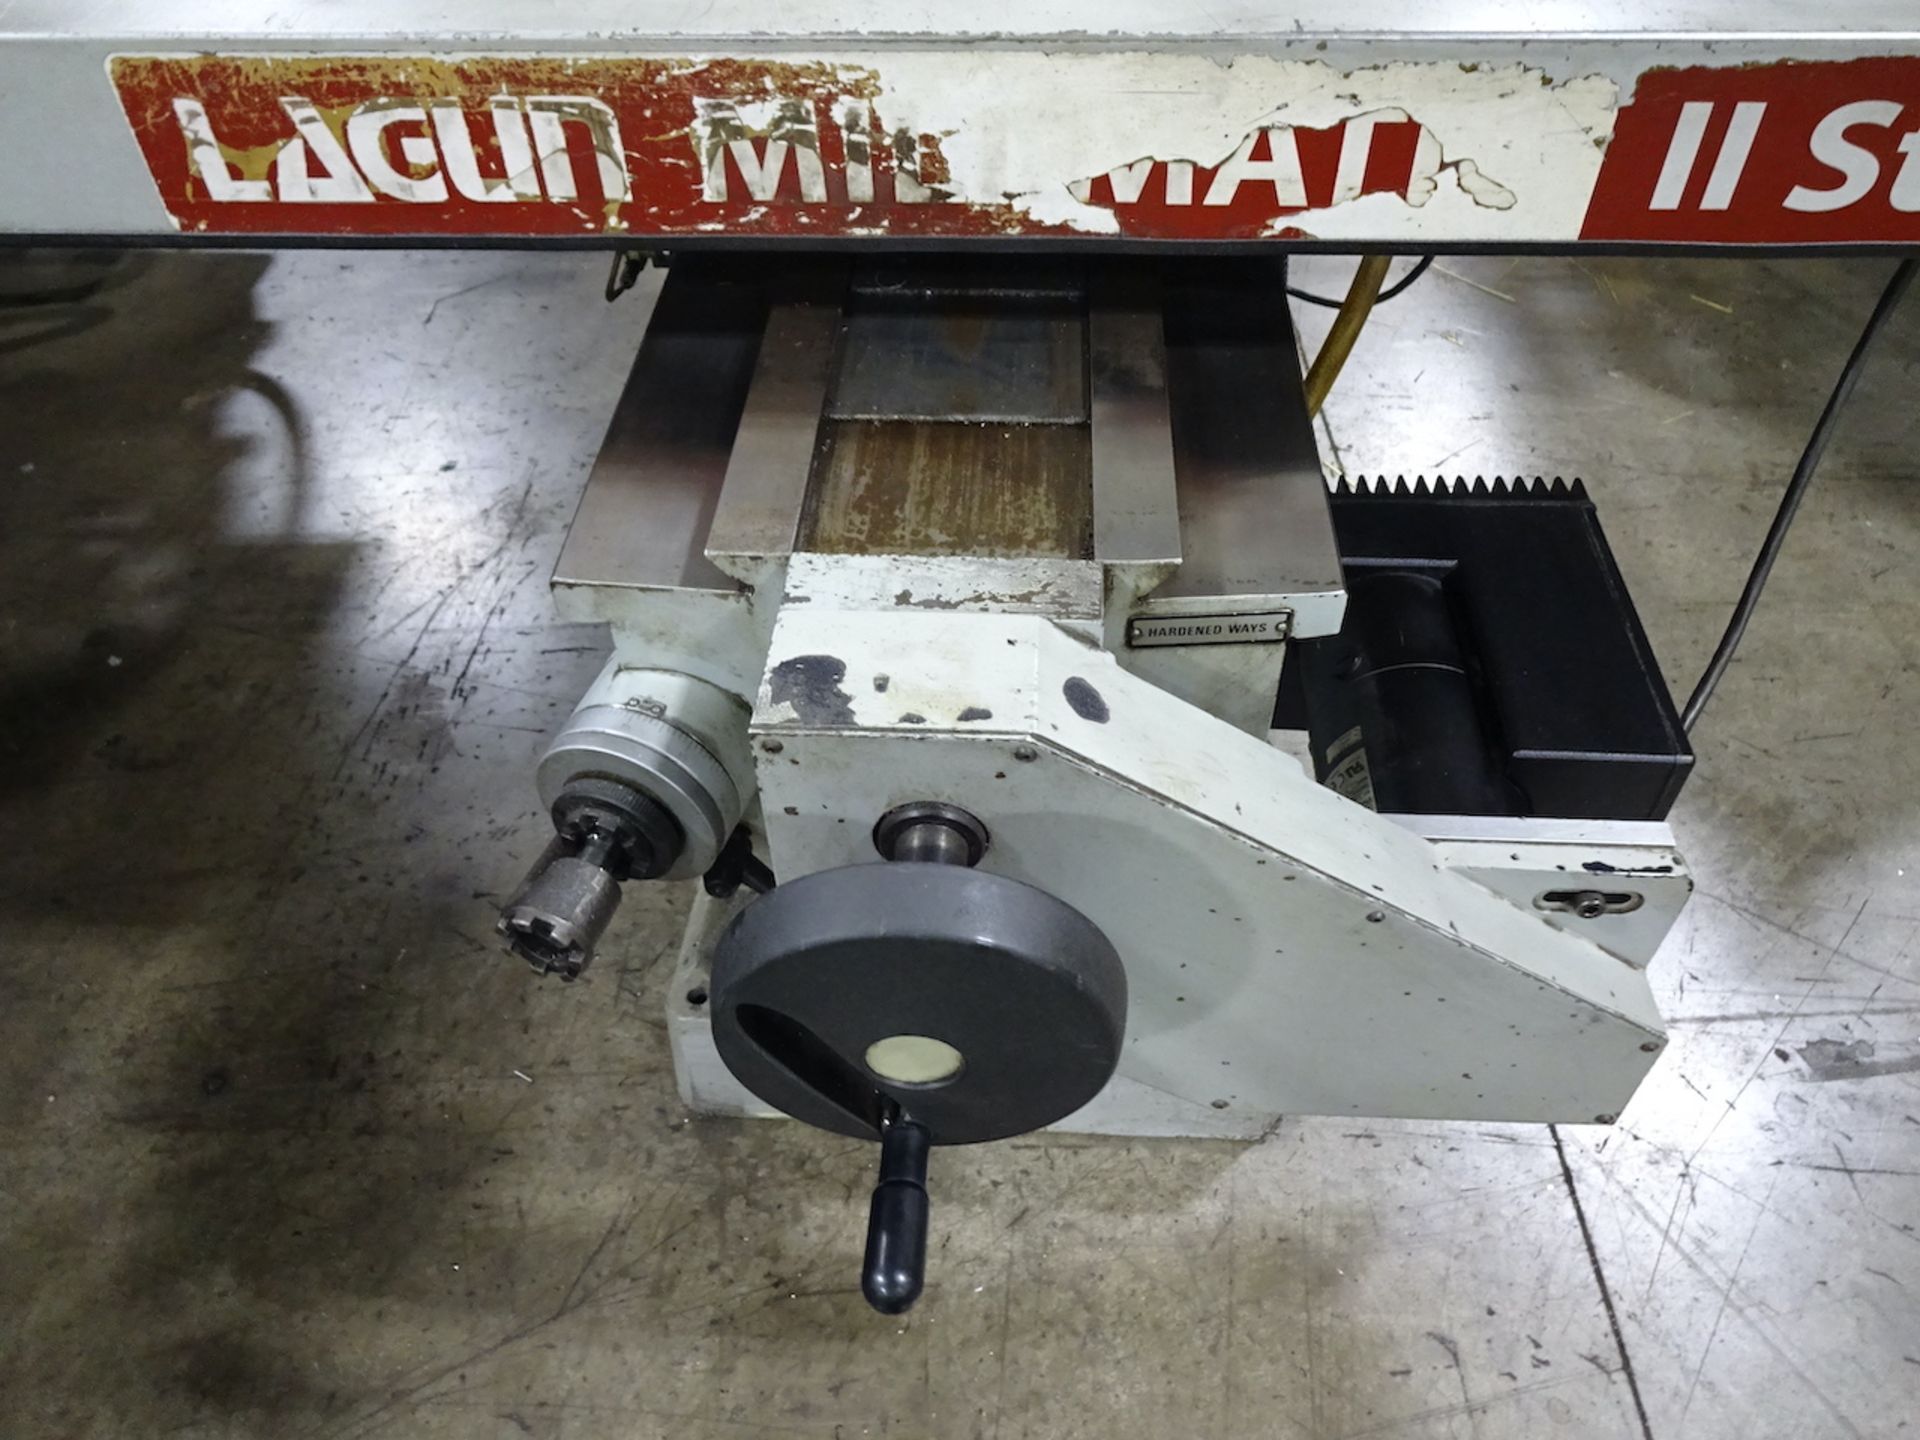 LAGUN MILLMATIC II 2 AXIS CNC VERTICAL KNEE MILL (2013) S/N 46621, 10 X 50 TABLE, 4200 RPM - Image 8 of 9